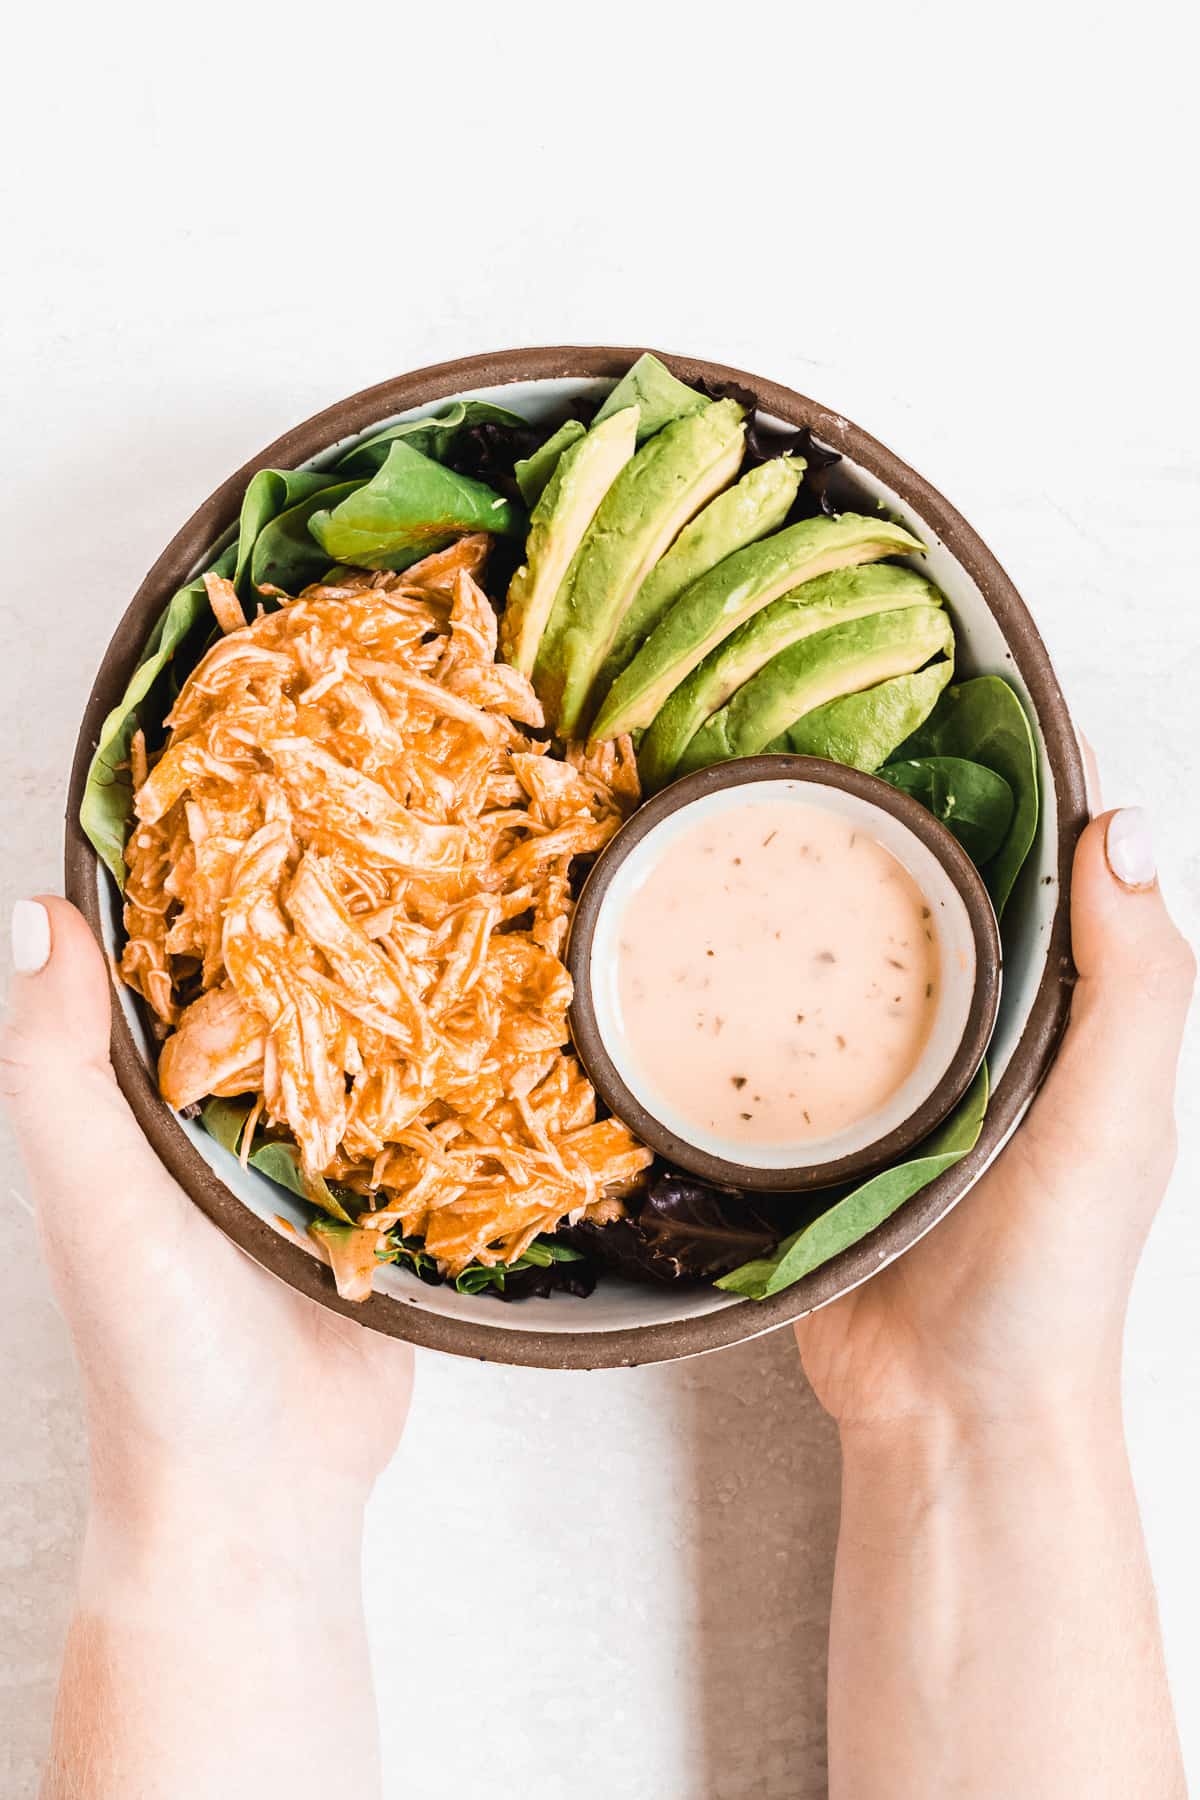 Hands holding bowl full of buffalo chicken, avocado slices, and dressing.